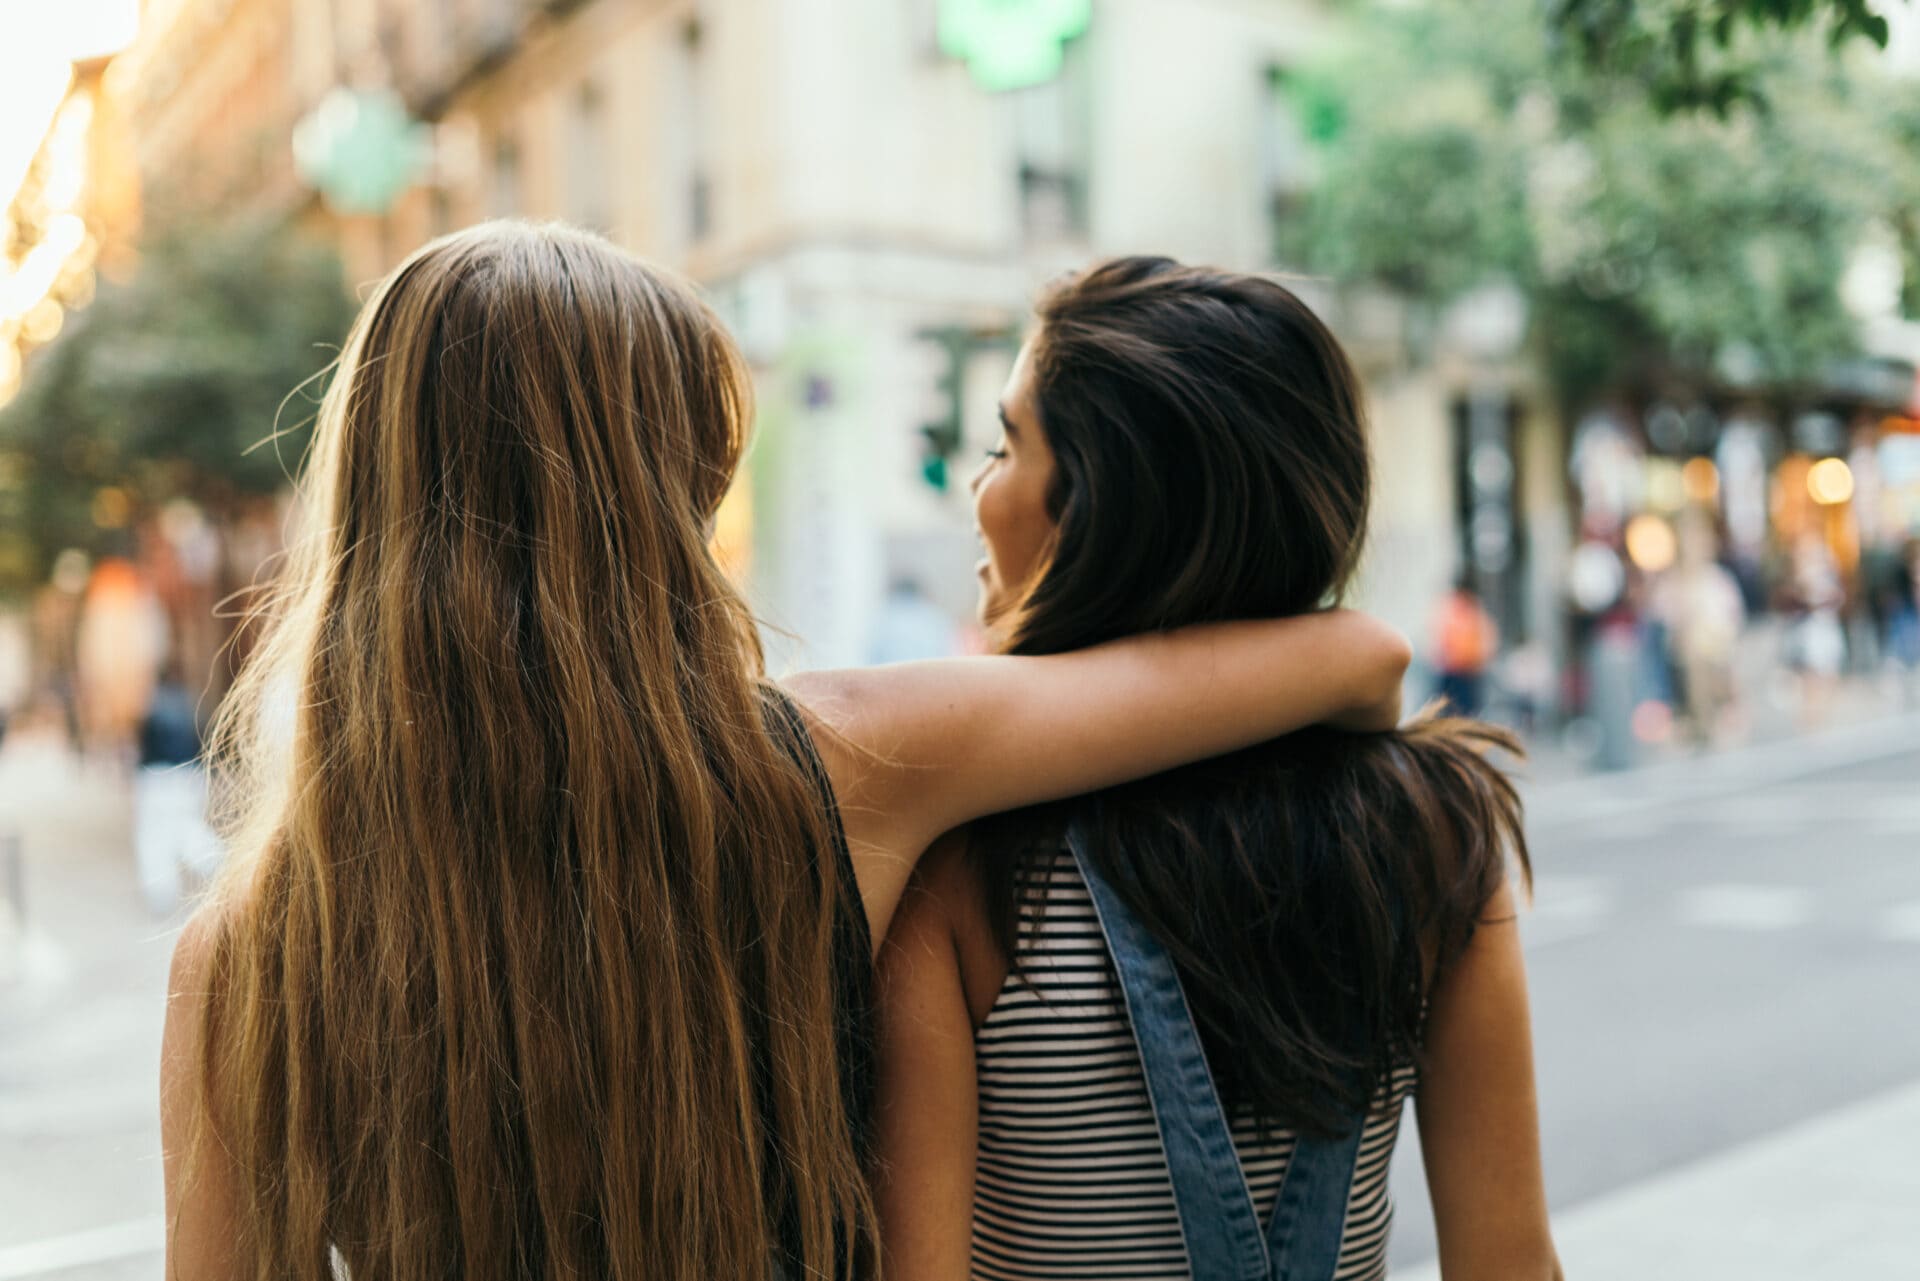 Rearview of a blonde female putting her arm around her friend